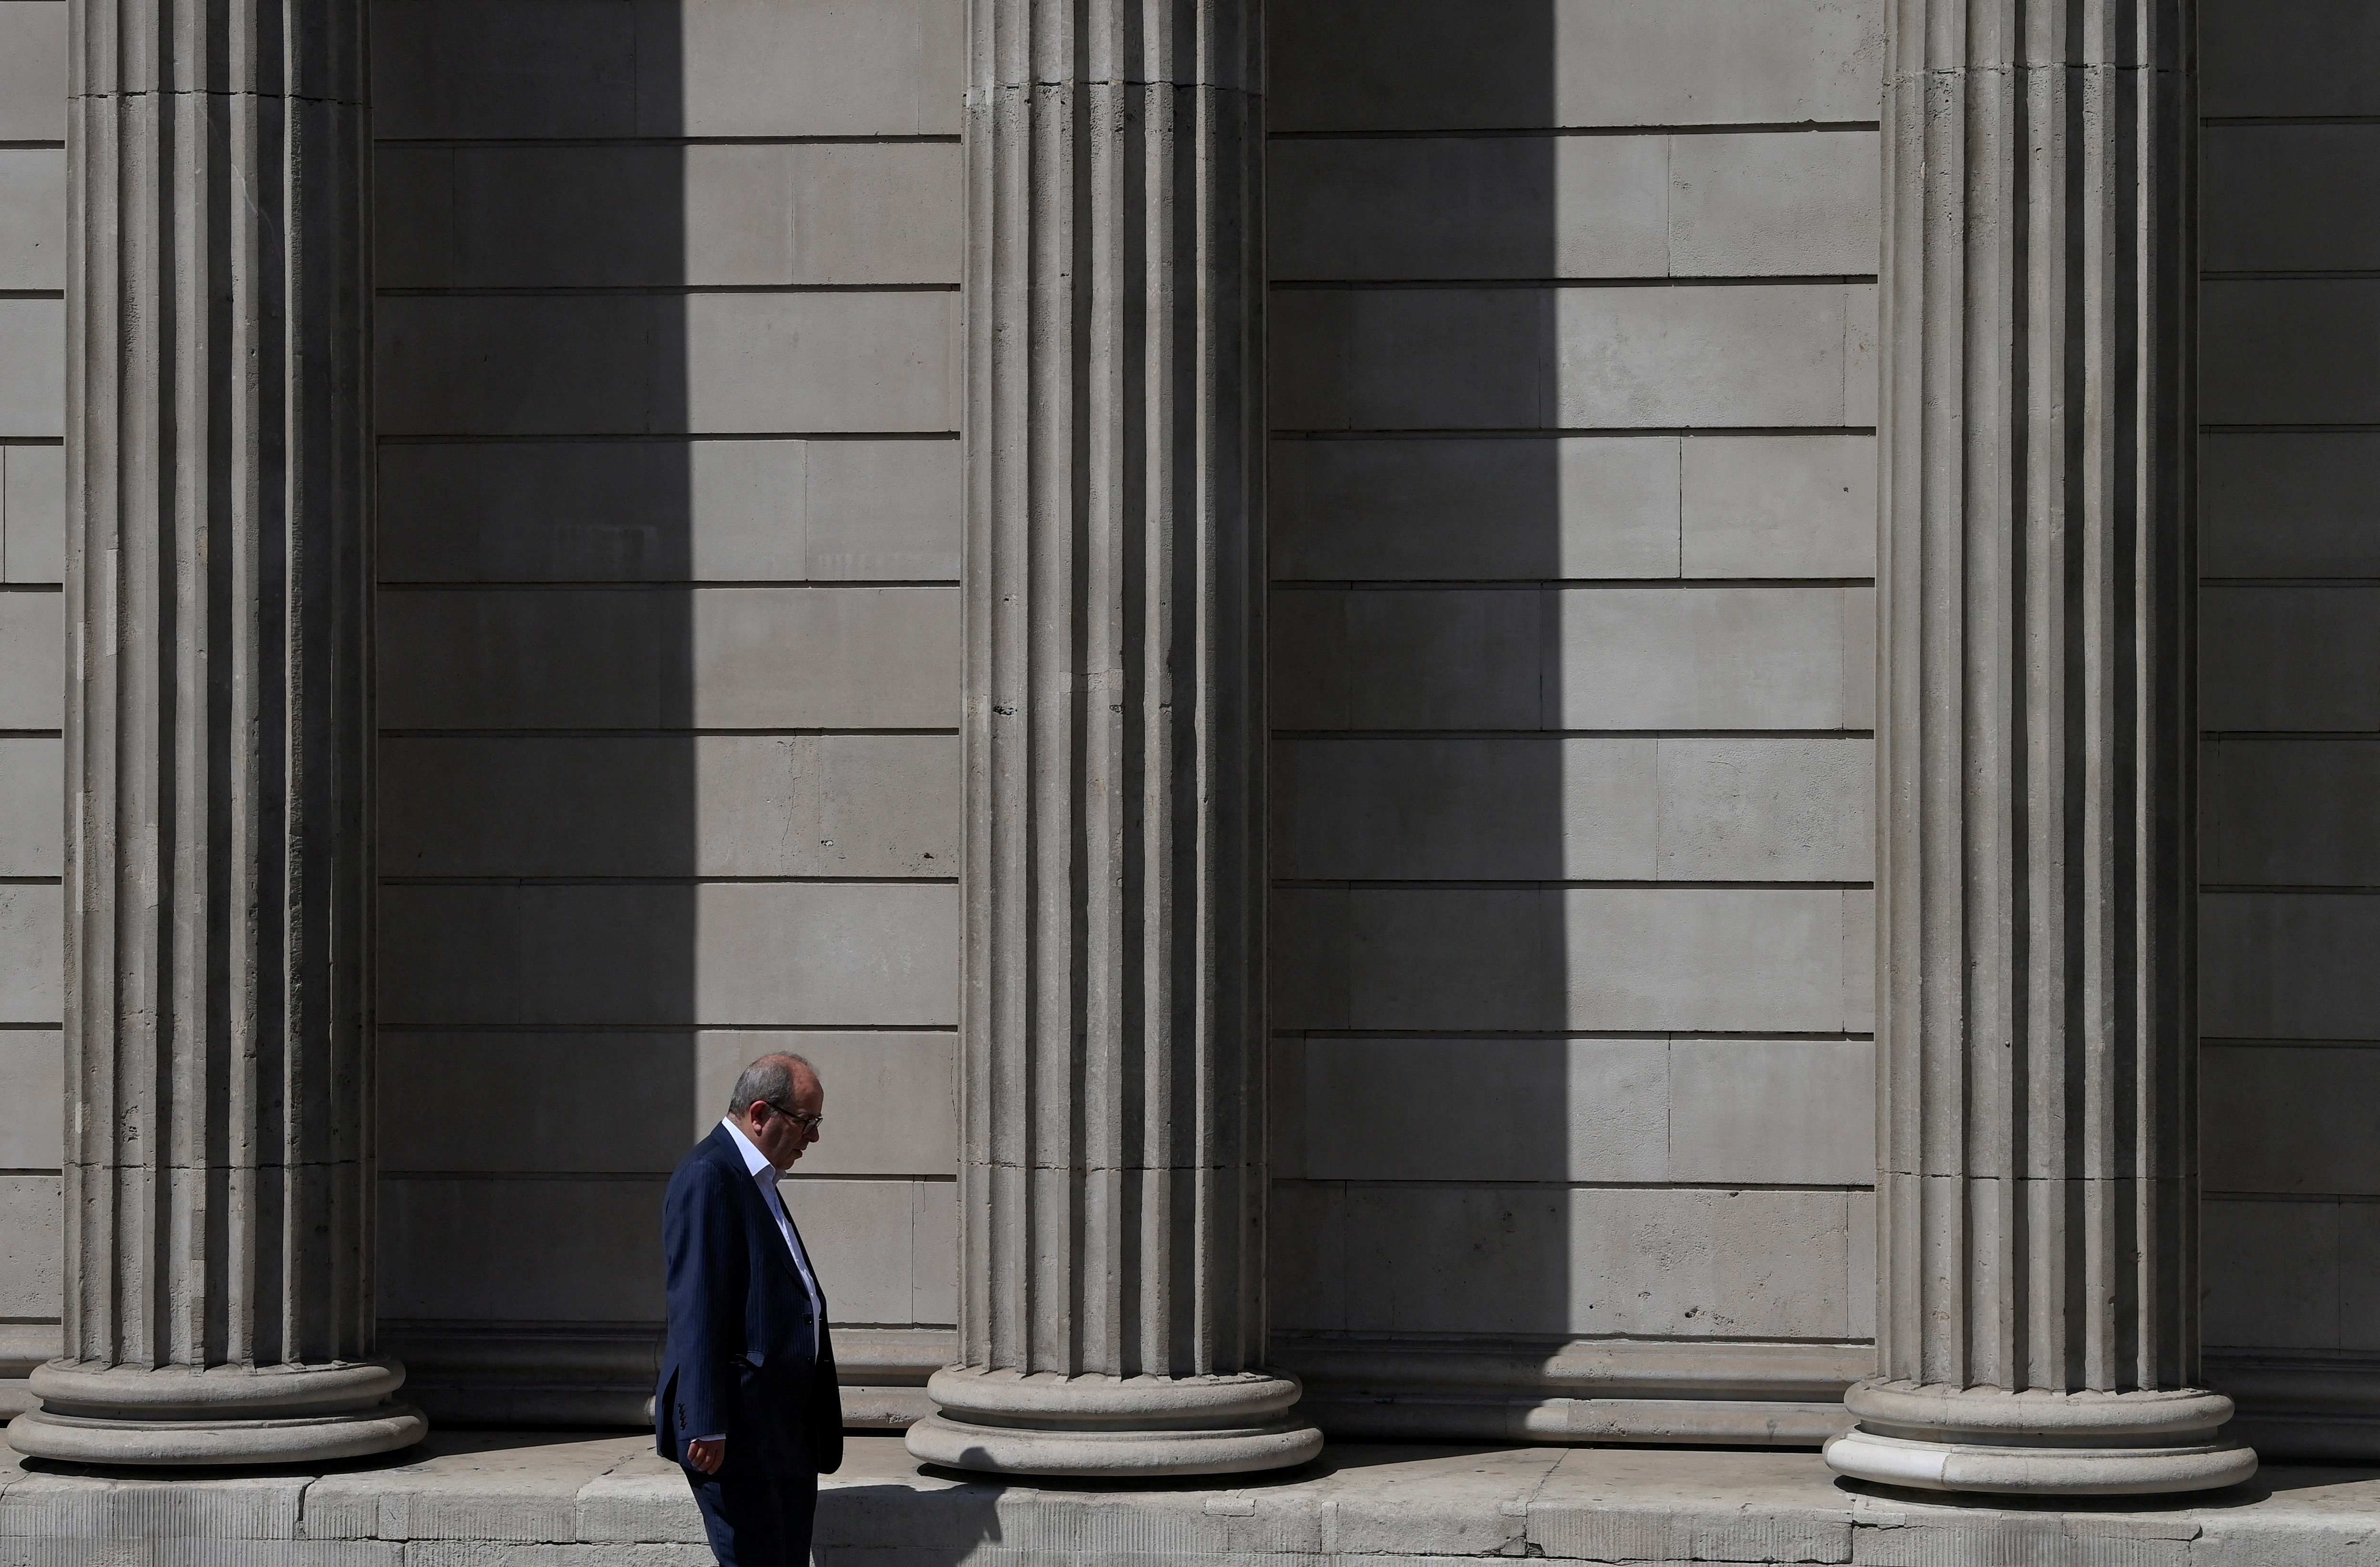 A worker walks past the Bank of England during the hot weather in the City of London financial district, London